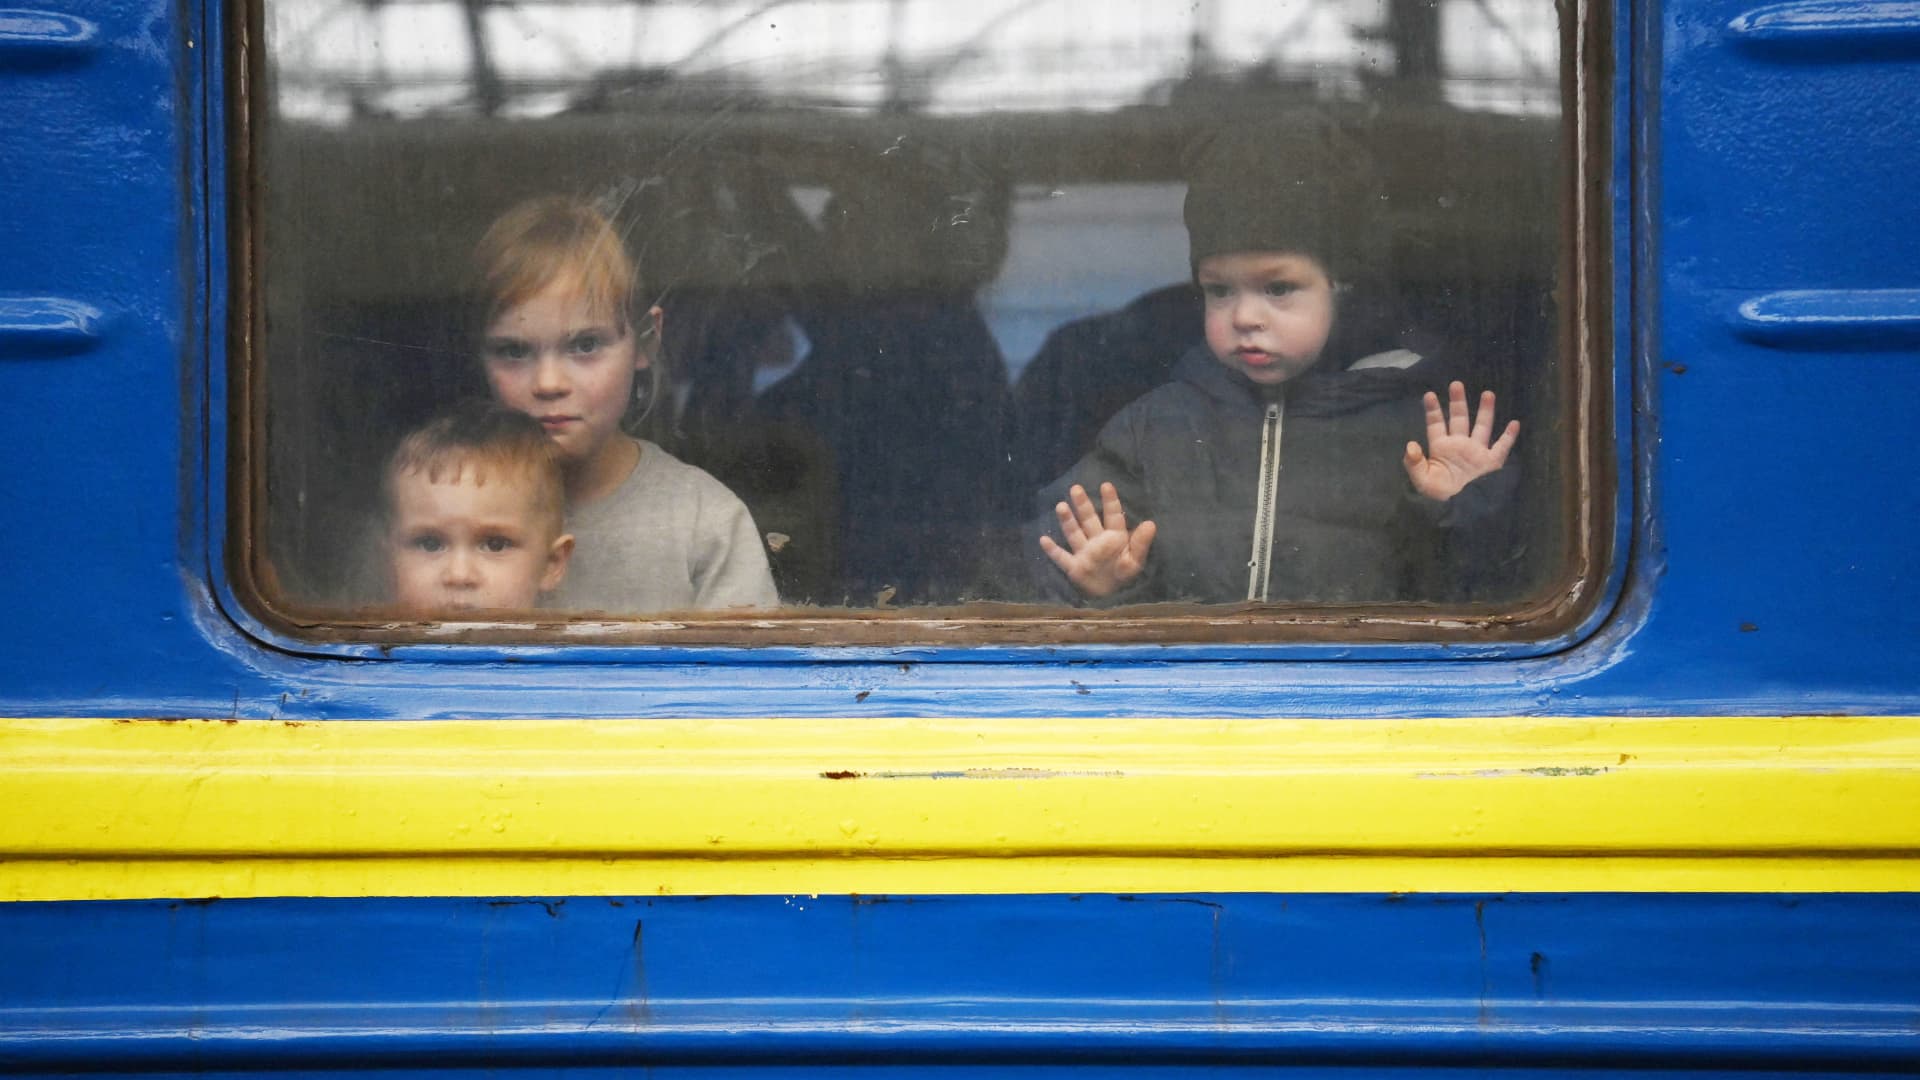 Children look out from a carriage window as a train prepares to depart from a station in Lviv, western Ukraine, enroute to the town of Uzhhorod near the border with Slovakia, on March 3, 2022.